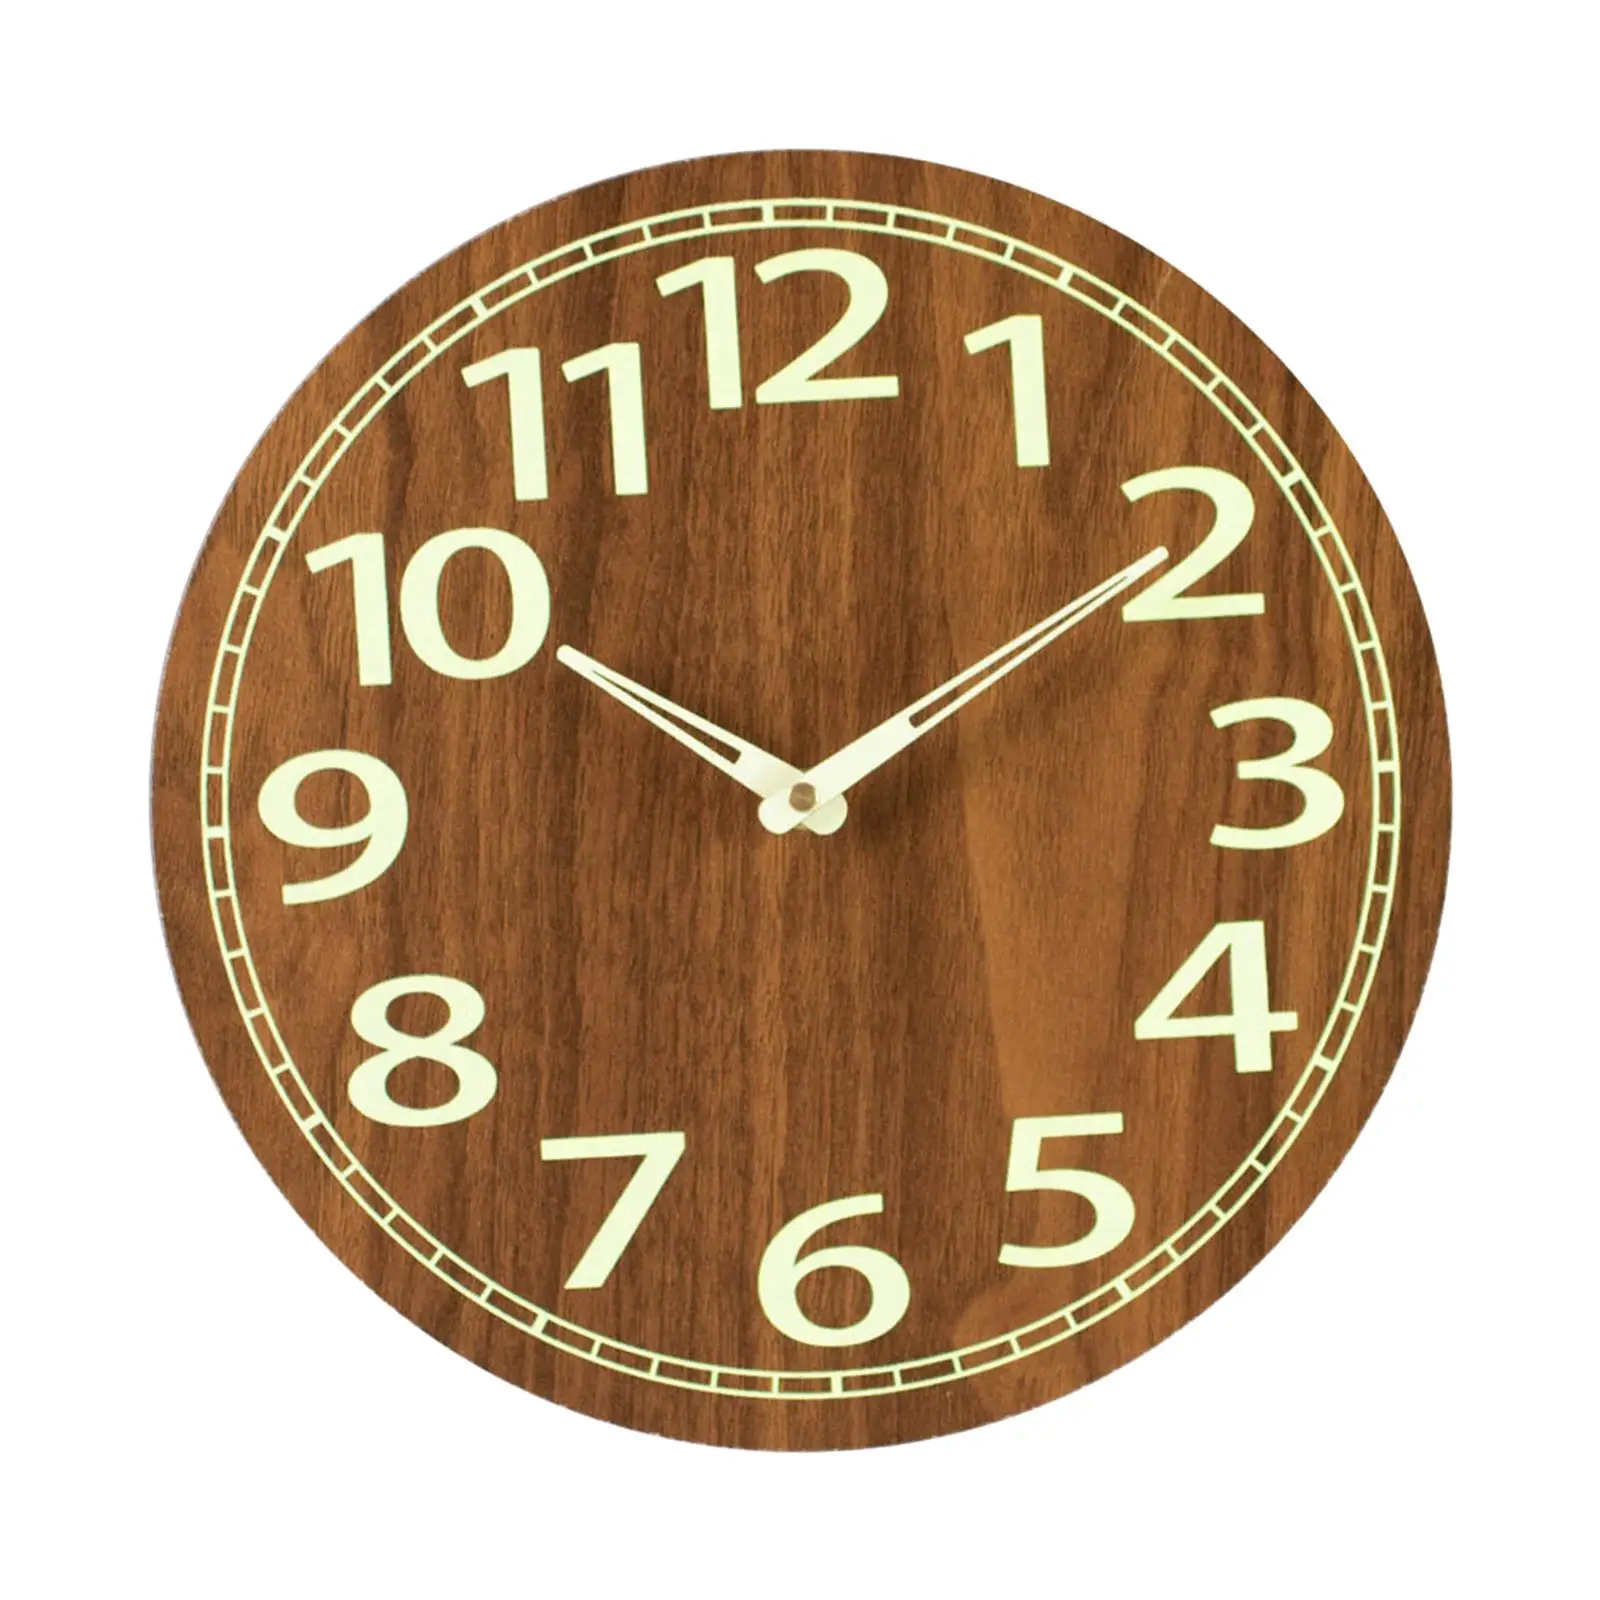 Luminous Wall Clock Decorative Silent Light in The Dark for Office Hotel Home Dining Room